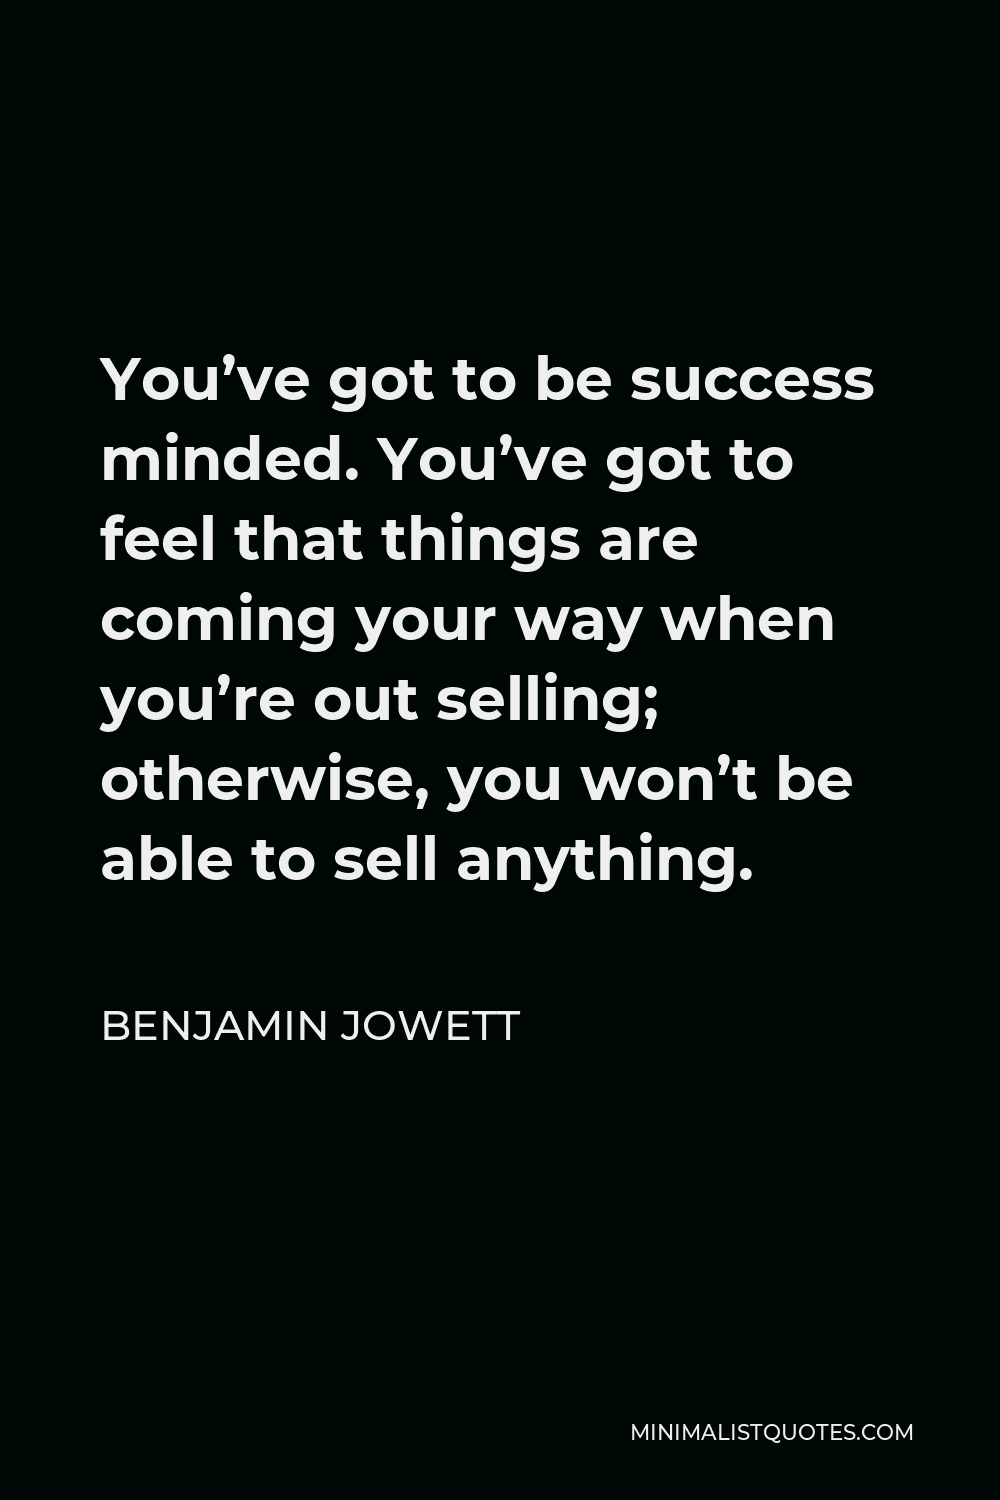 Benjamin Jowett Quote - You’ve got to be success minded. You’ve got to feel that things are coming your way when you’re out selling; otherwise, you won’t be able to sell anything.